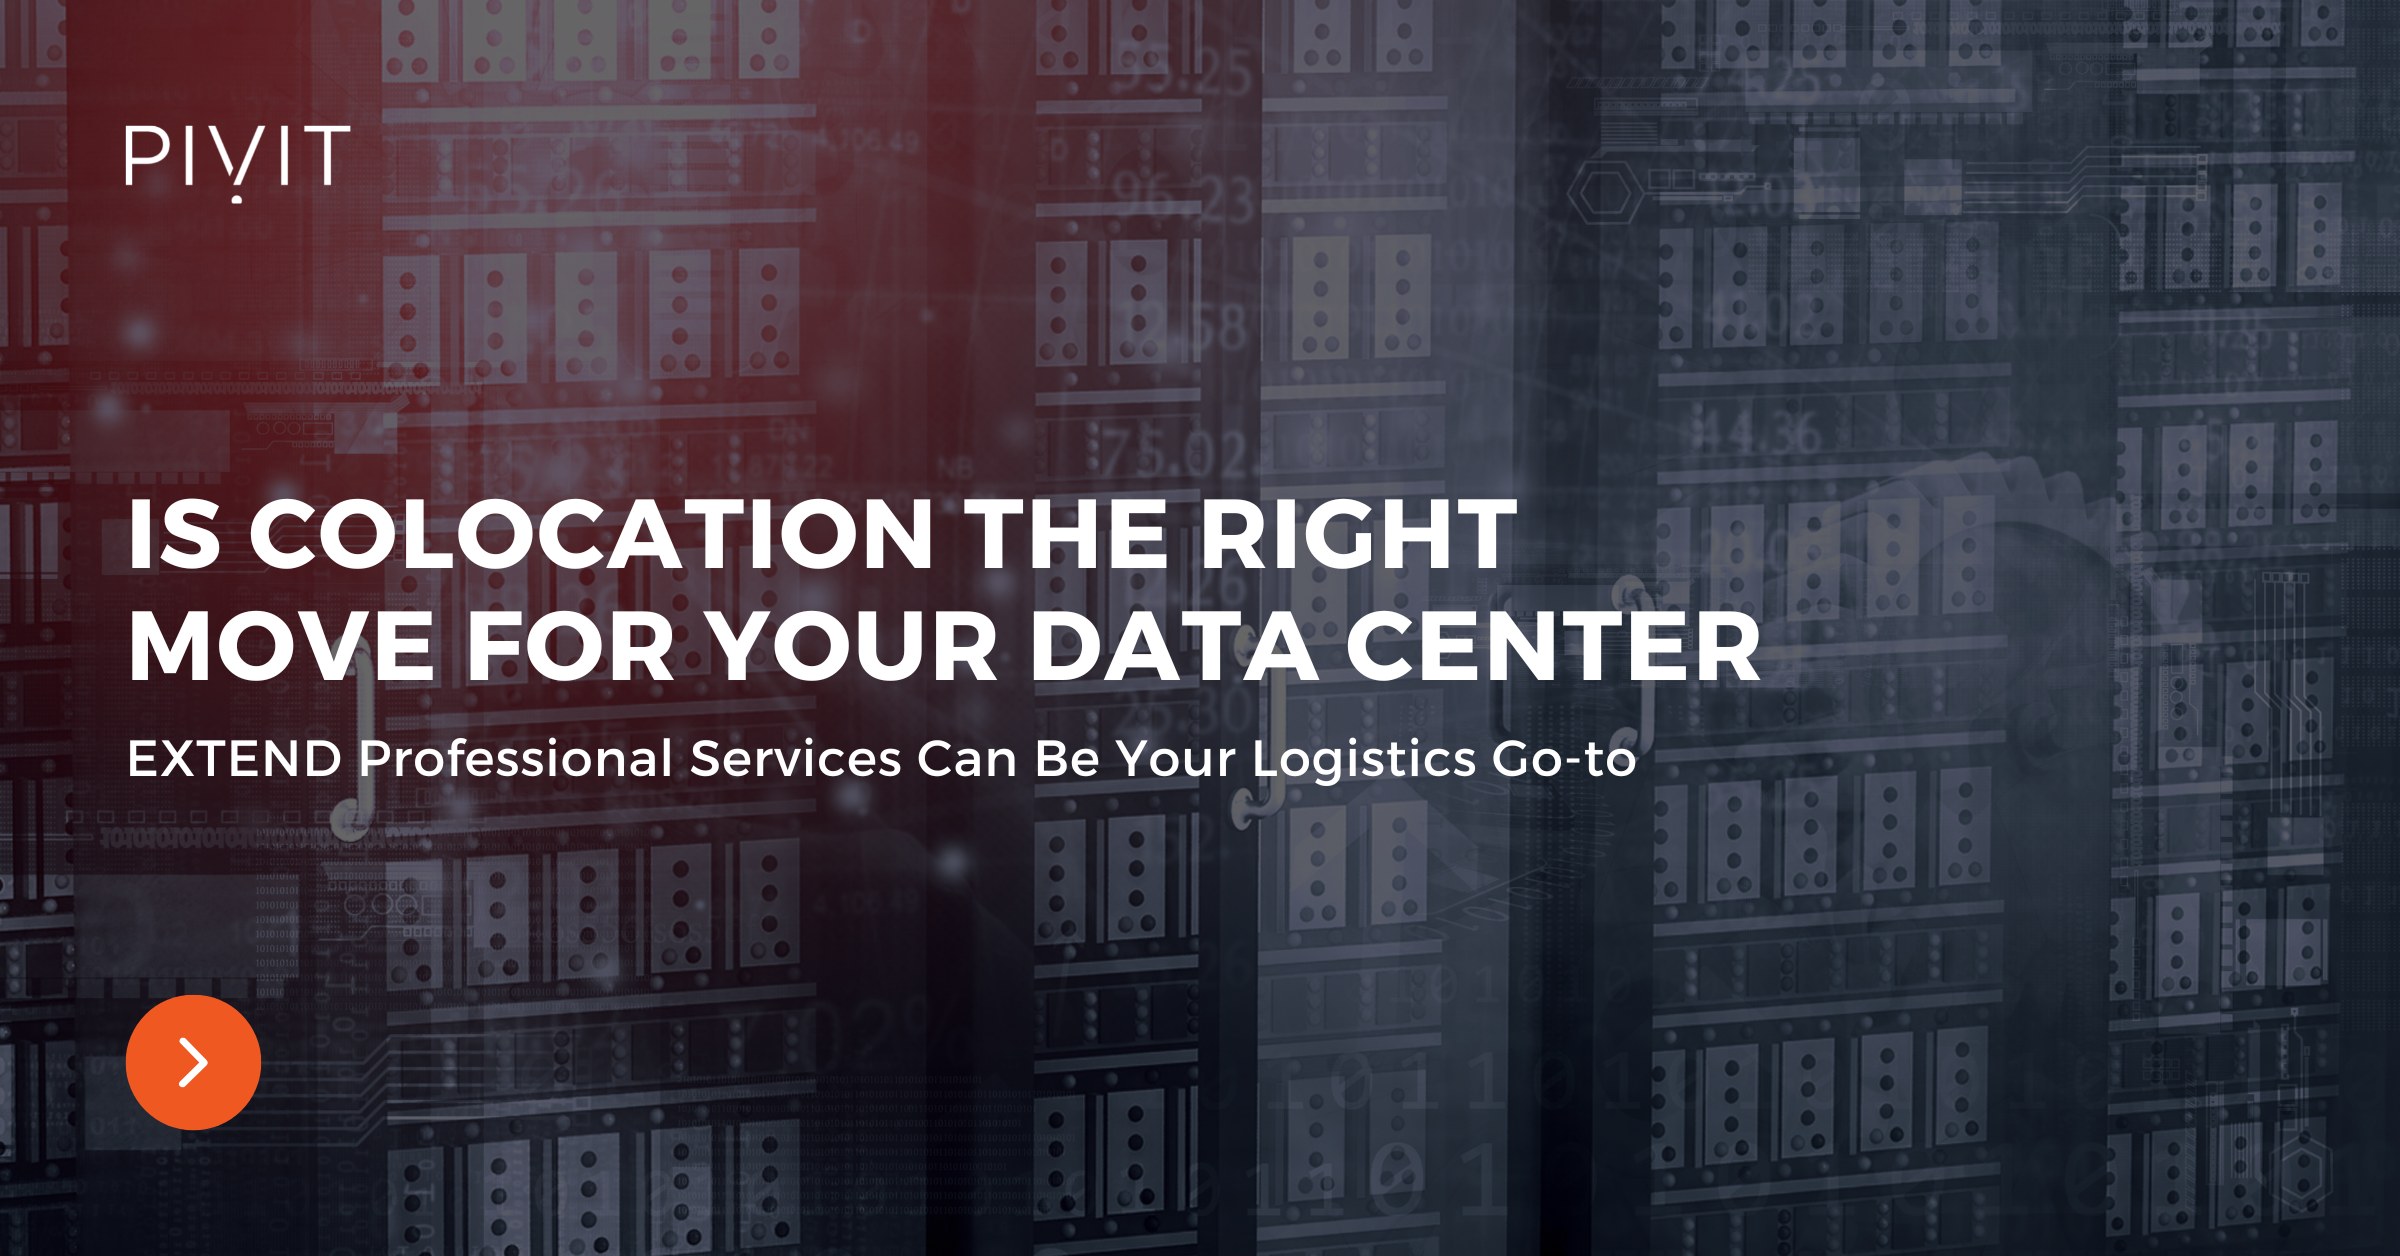 Is Colocation the Right Move for Your Data Center